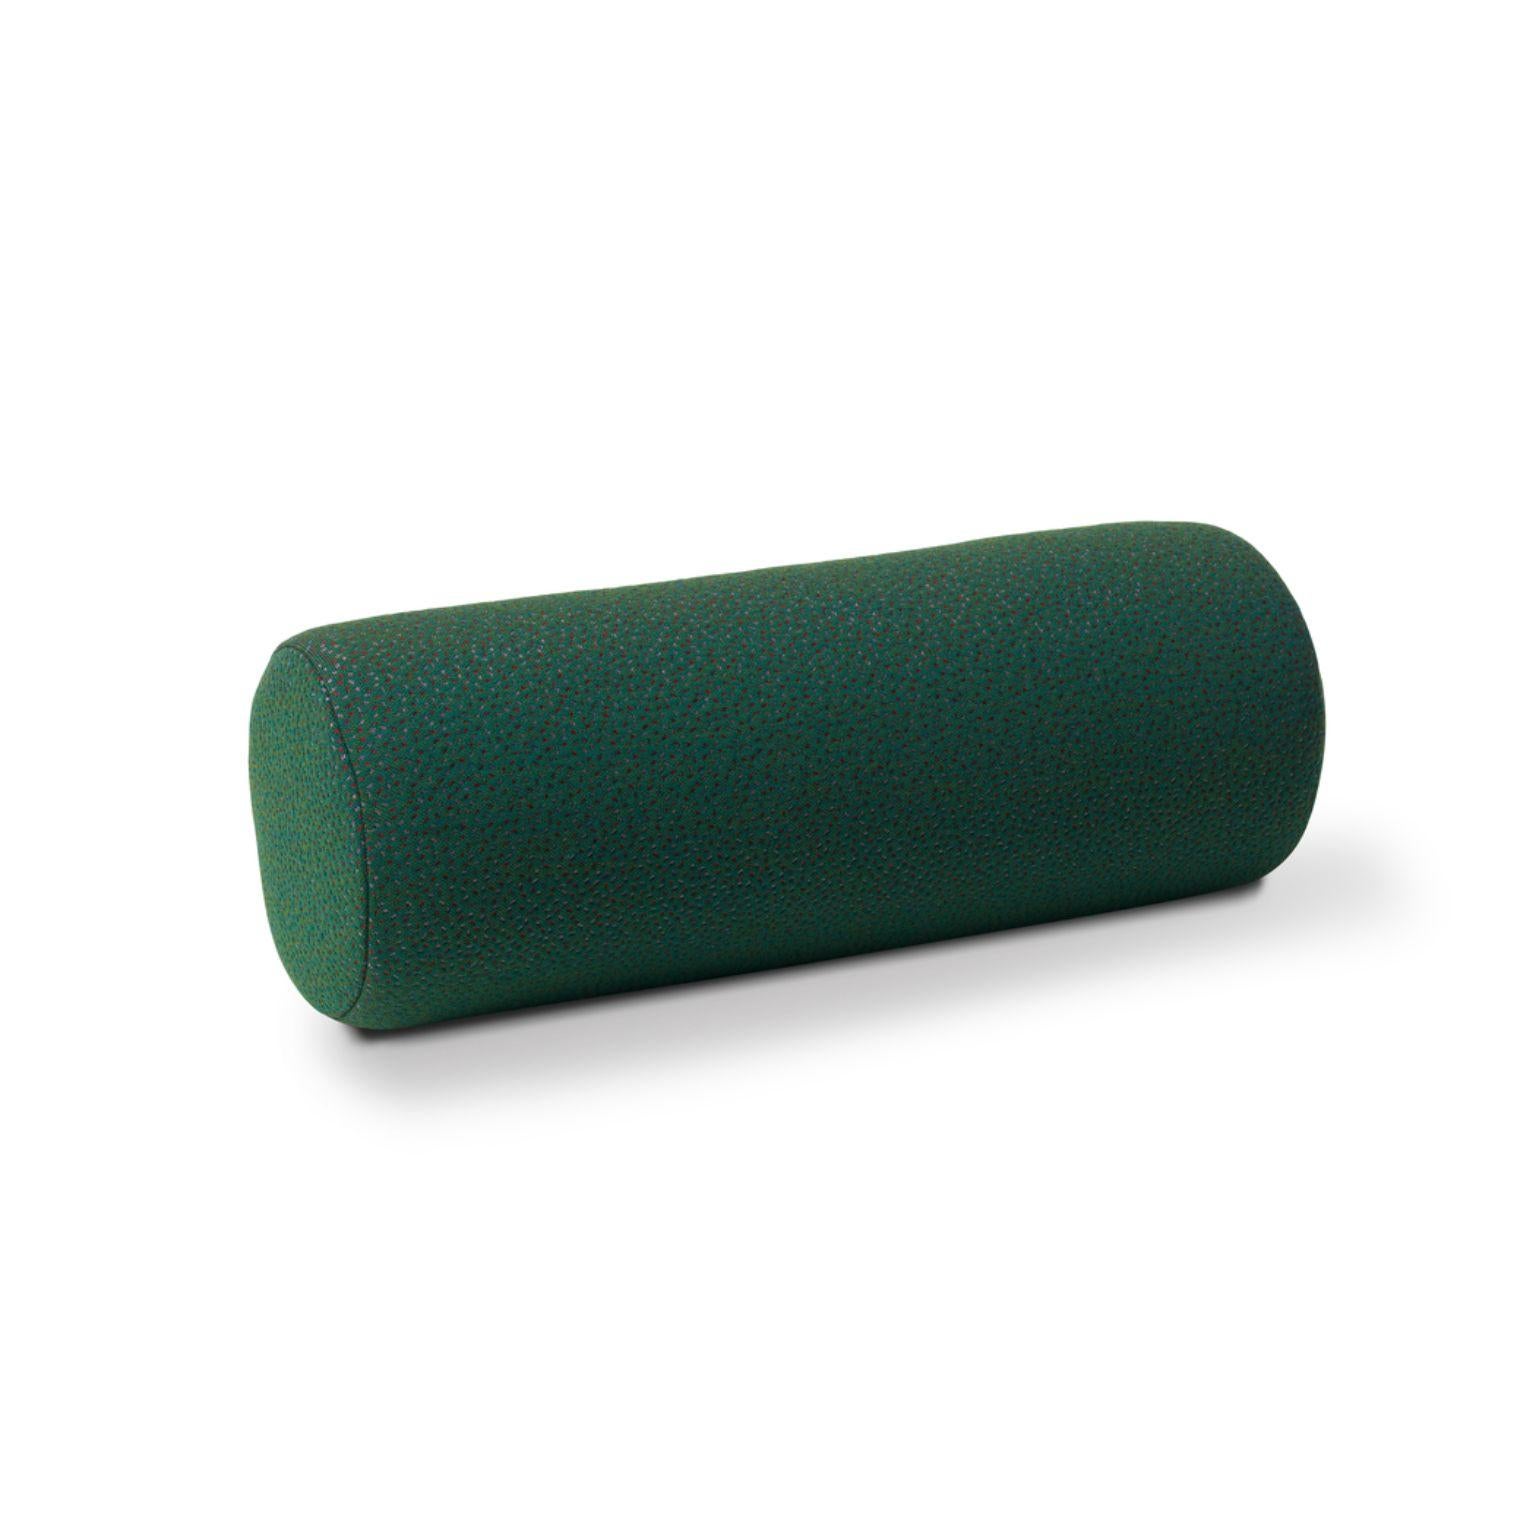 Galore cushion sprinkles hunter green by Warm Nordic
Dimensions: D16 x H 46 cm
Material: Textile upholstery, Granulate and feathers filling.
Weight: 0.9 kg
Also available in different colours and finishes.  

An elegant bolster cushion, which